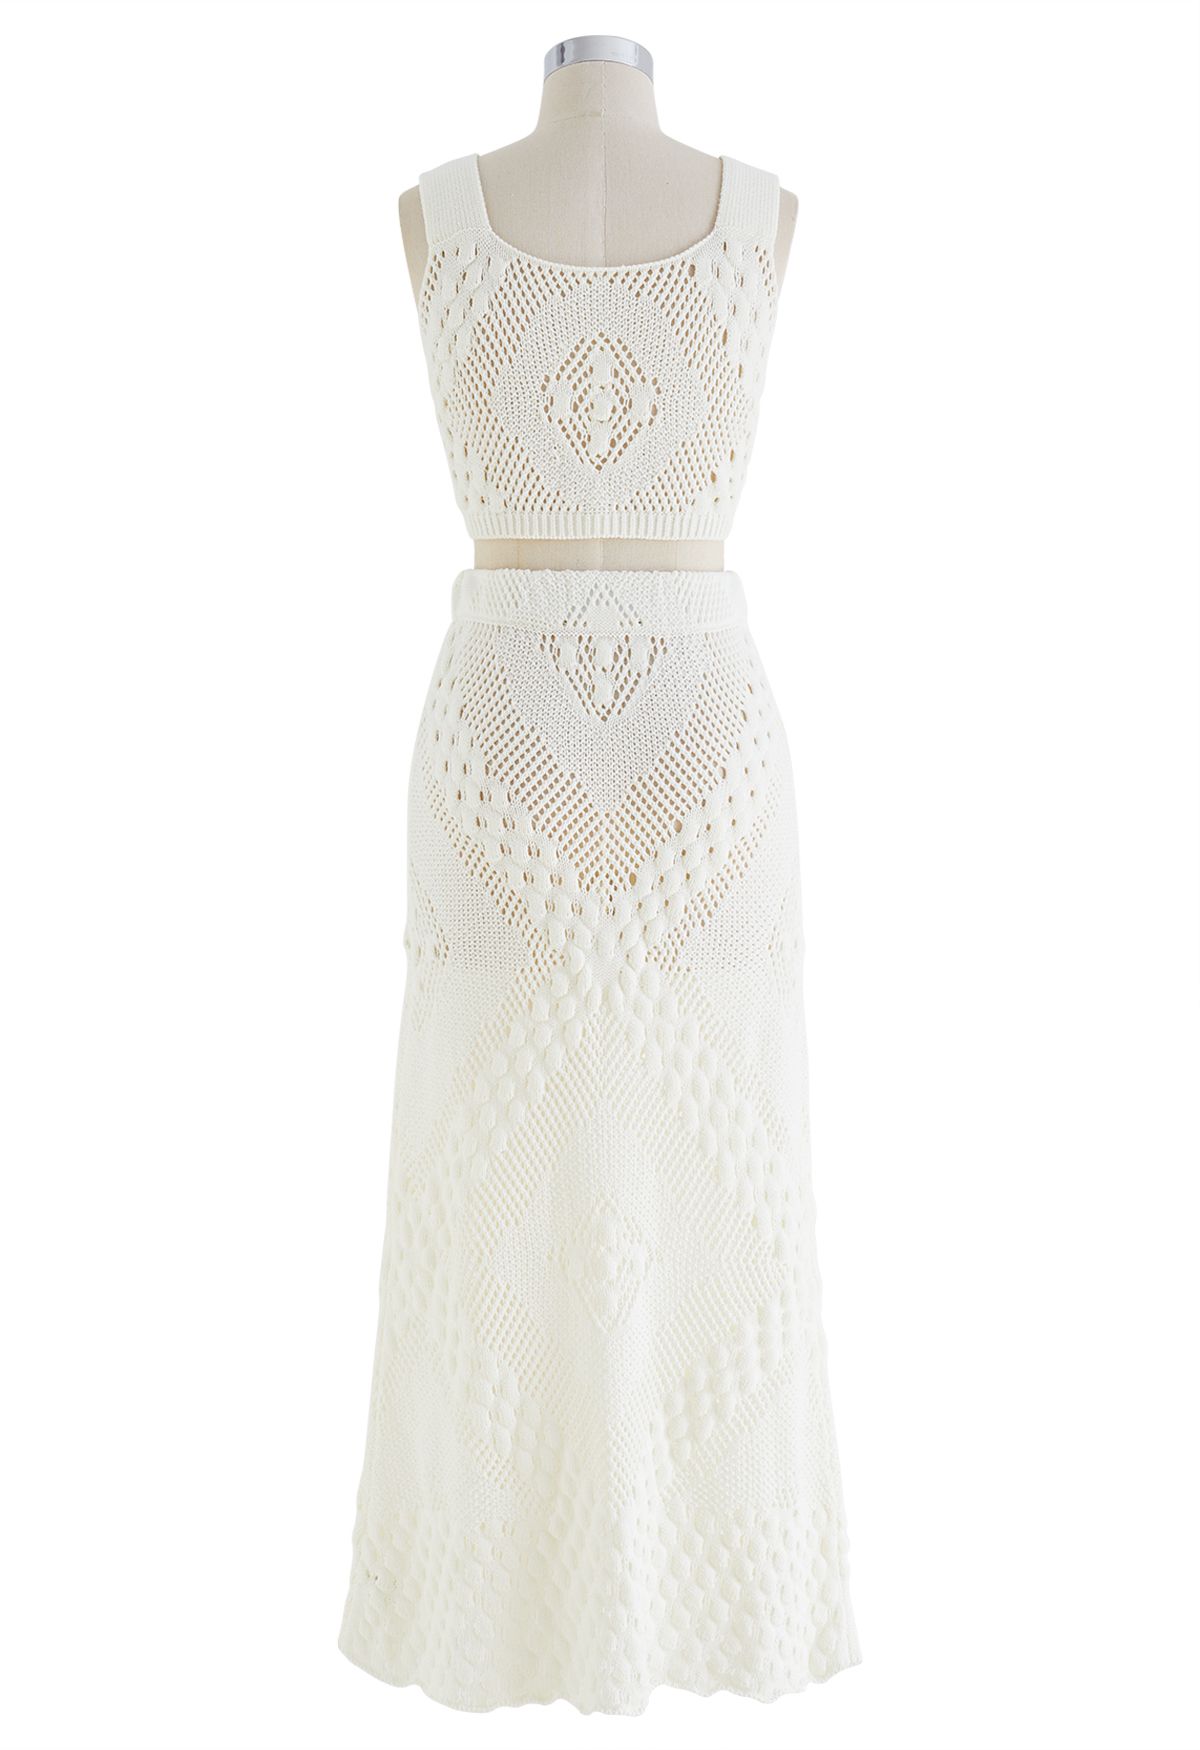 Embossed Pointelle Knit Tank Top and Skirt Set in Ivory